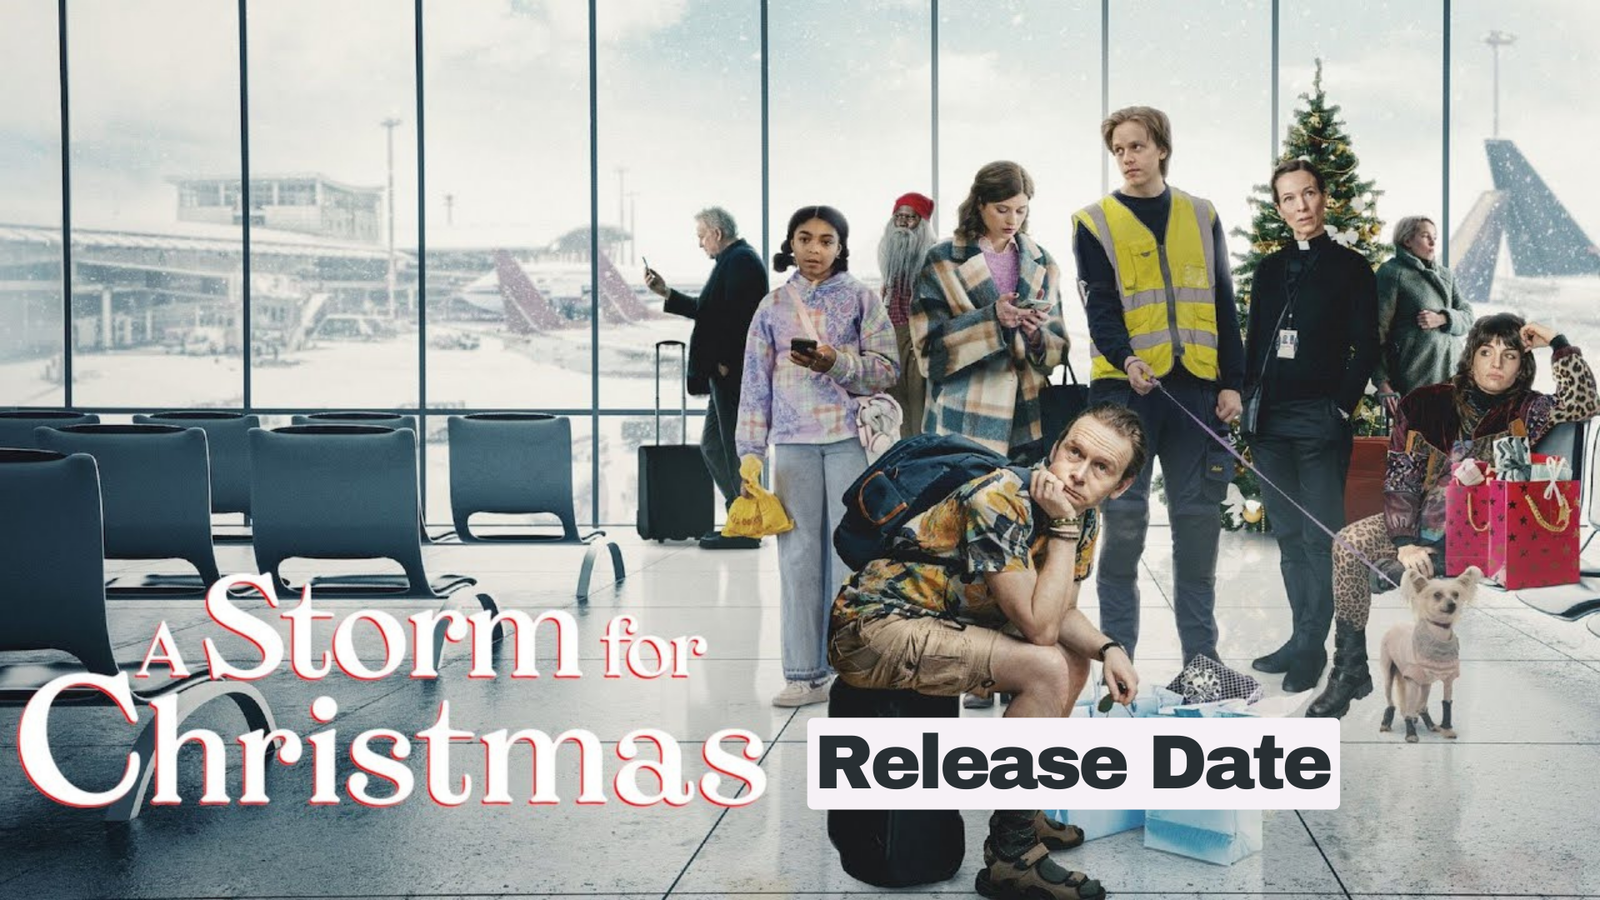 A Storm for Christmas Release Date, Trailer - Is it Canceled?